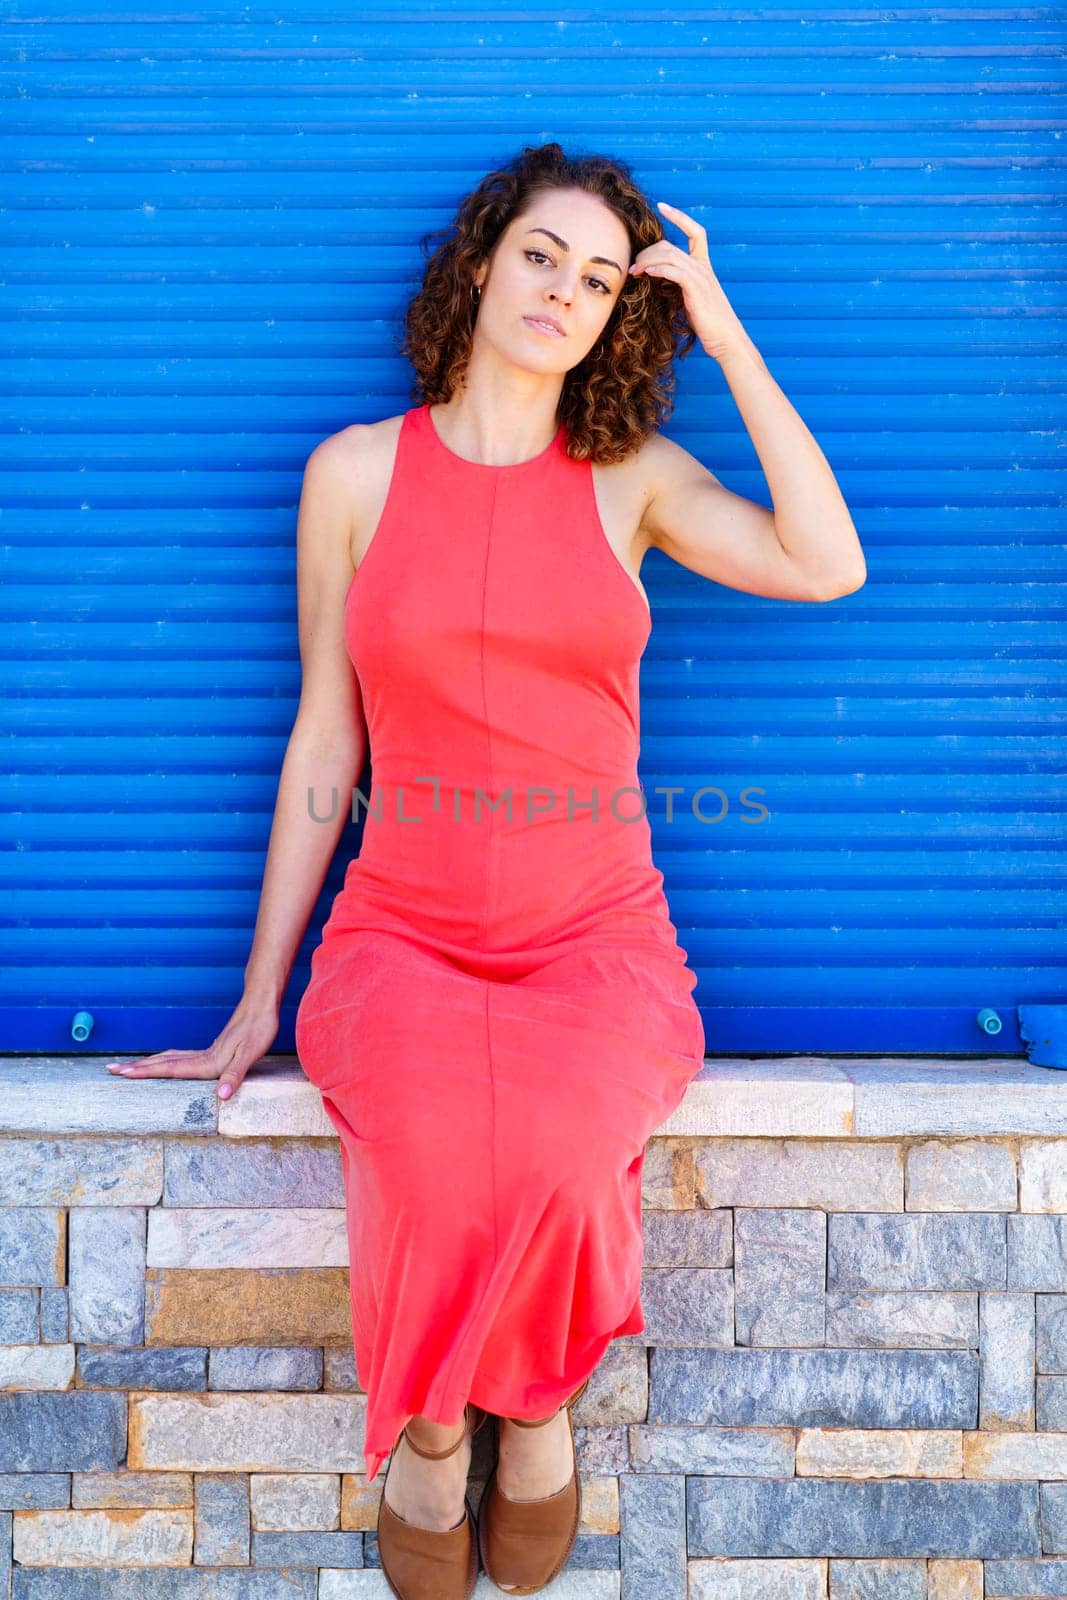 Attractive young female in red sundress, sitting on stone wall with sandals and looking at camera while touching hair with hand in daylight against blue shutters